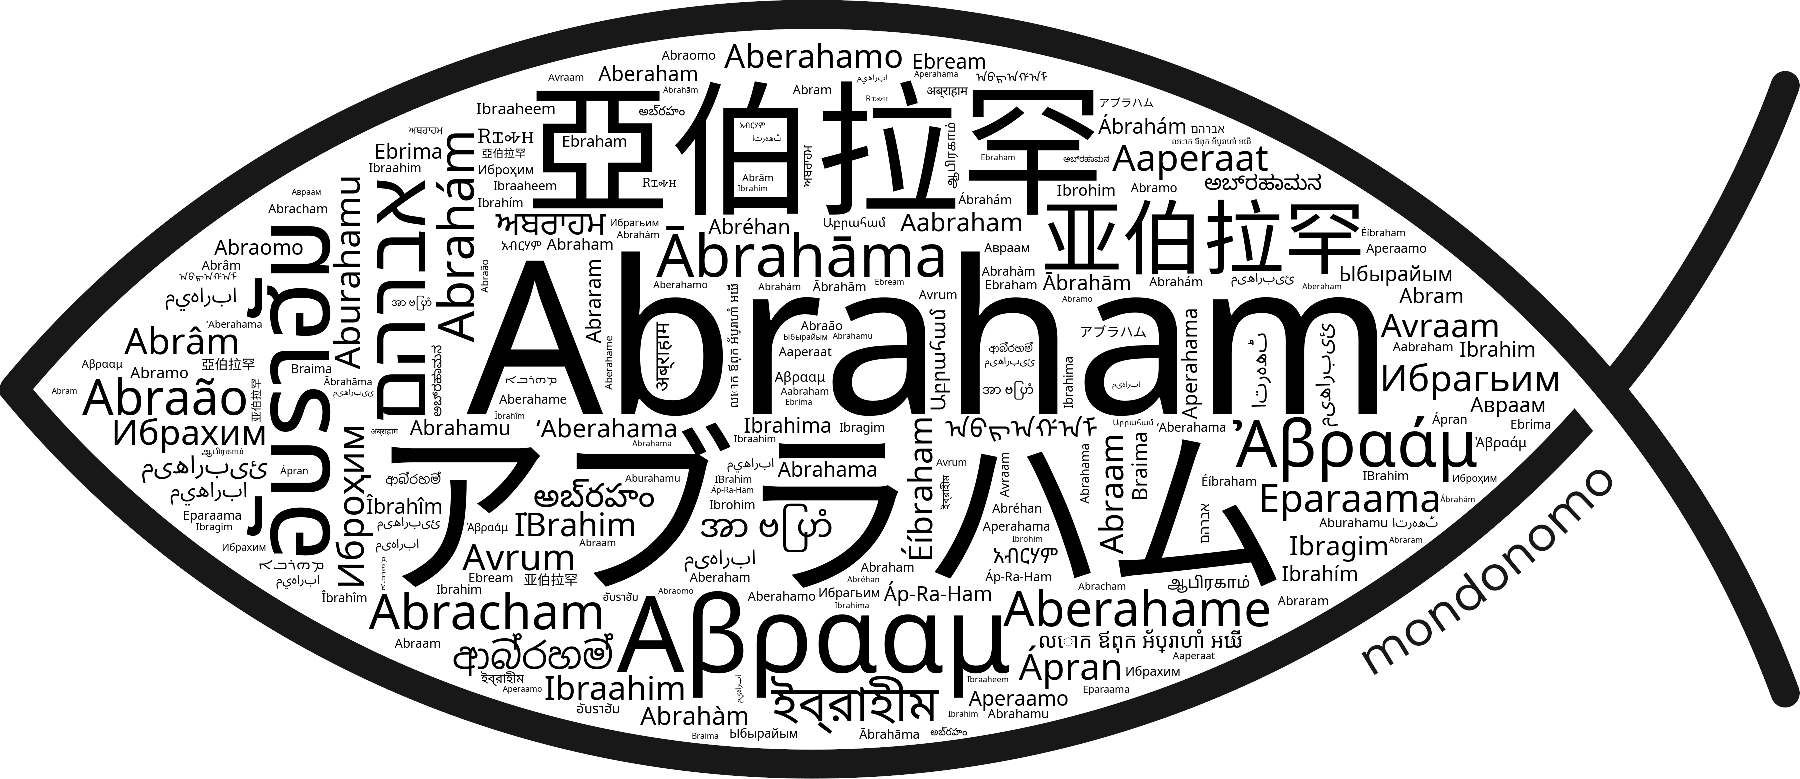 Name Abraham in the world's Bibles